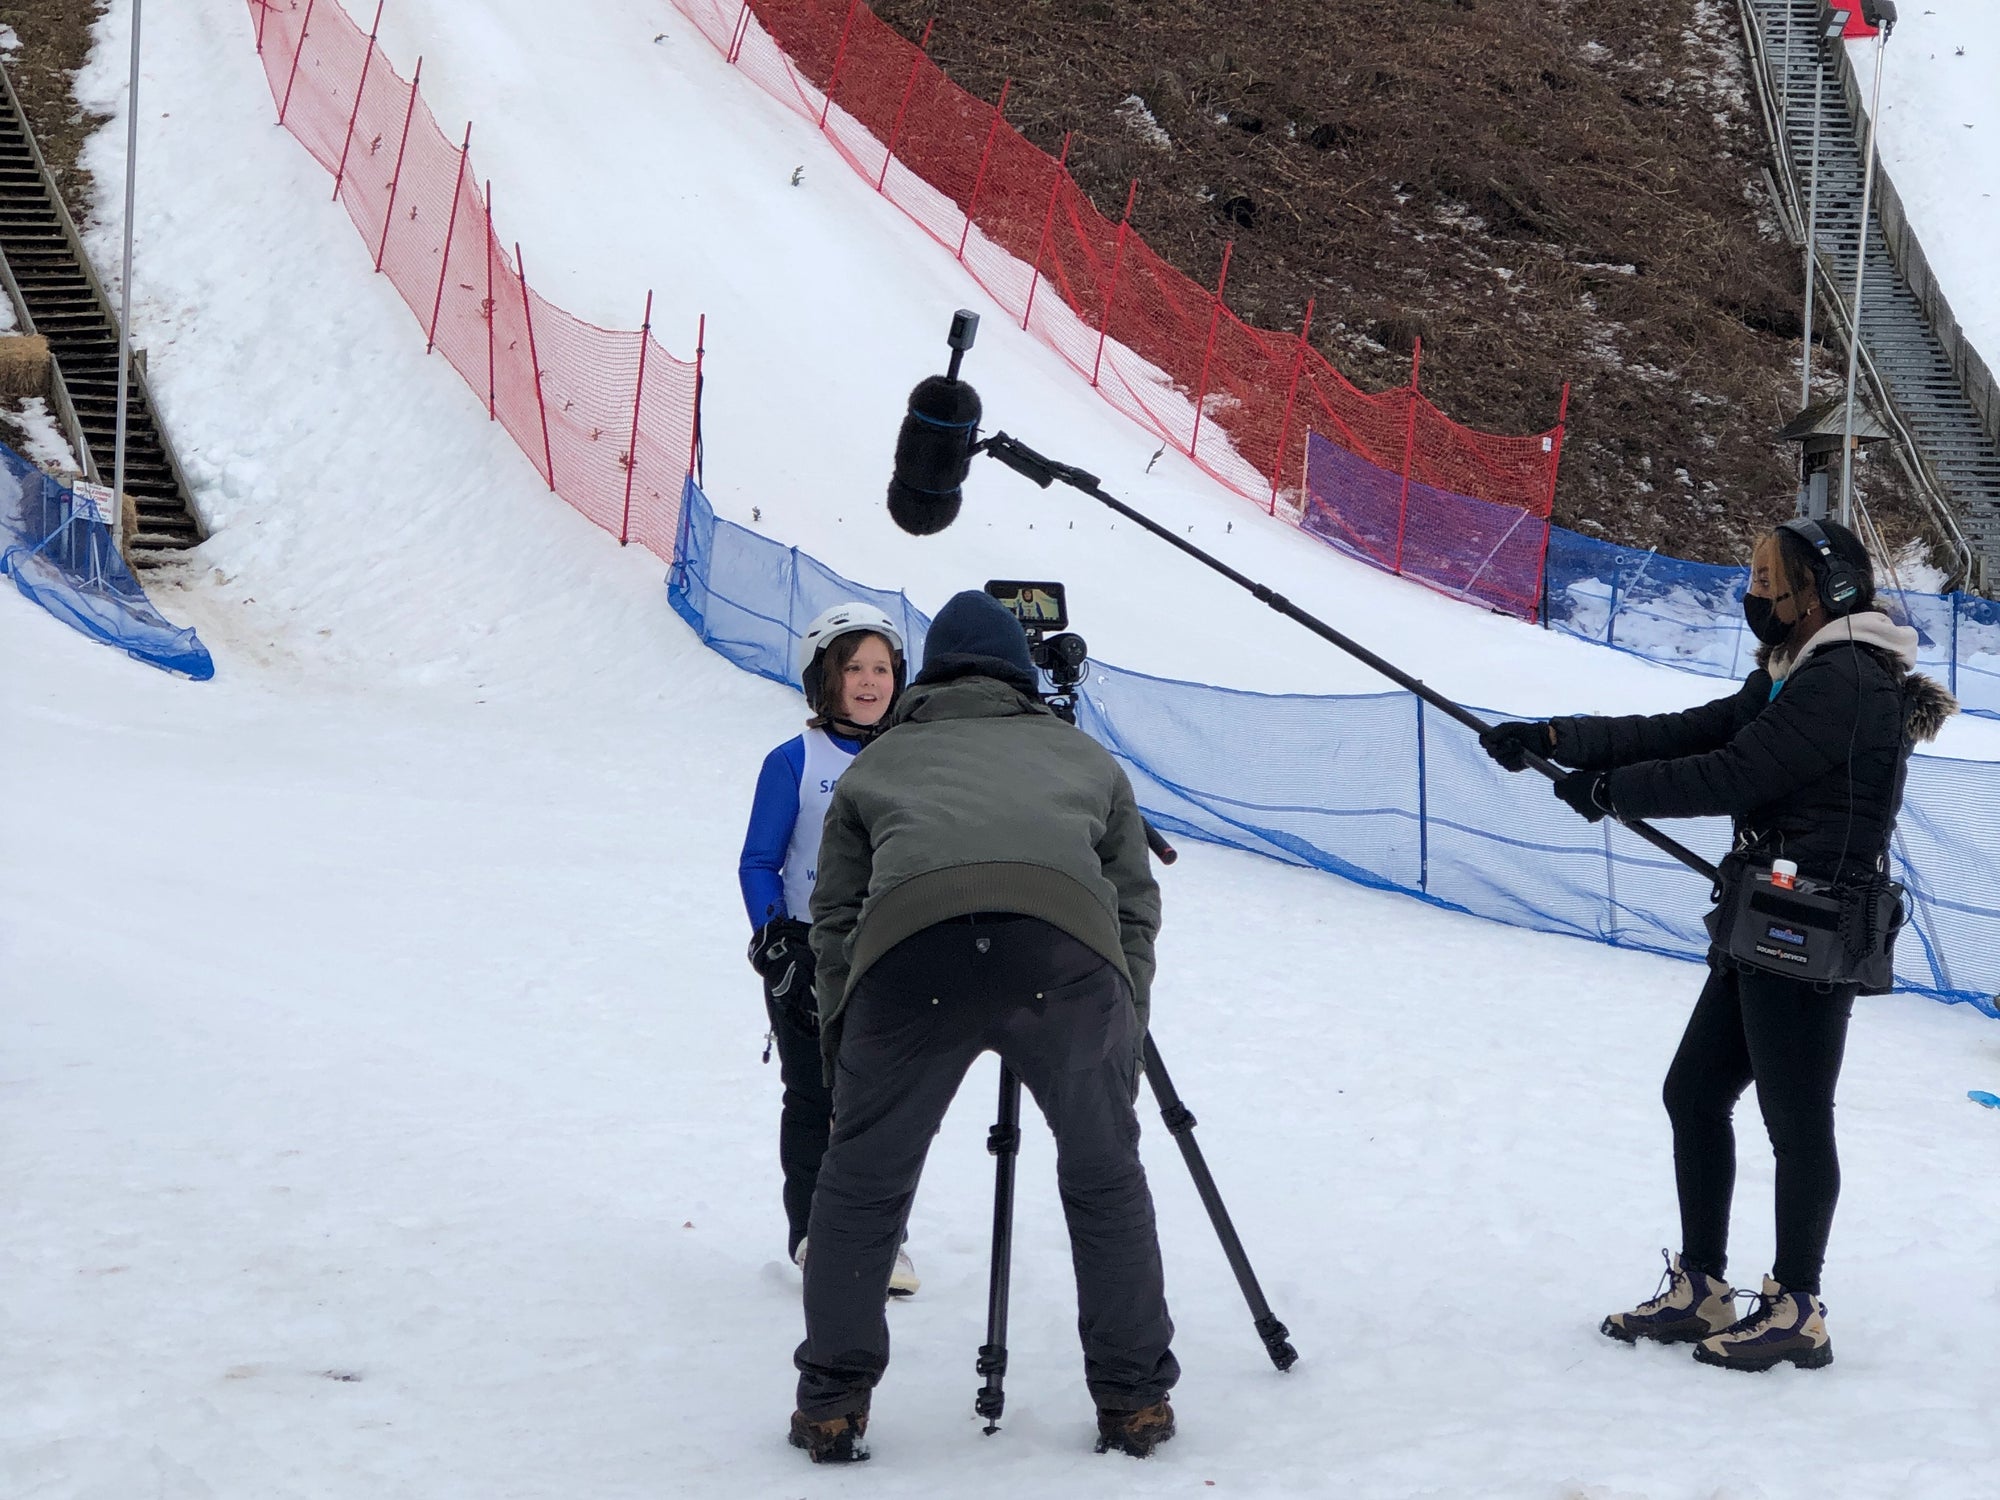 Ava Joyal interviews with the Connecticut Public TV, NPR at the 96th Sailsbury, CT JumpFest 2022 for Ski Jumping!